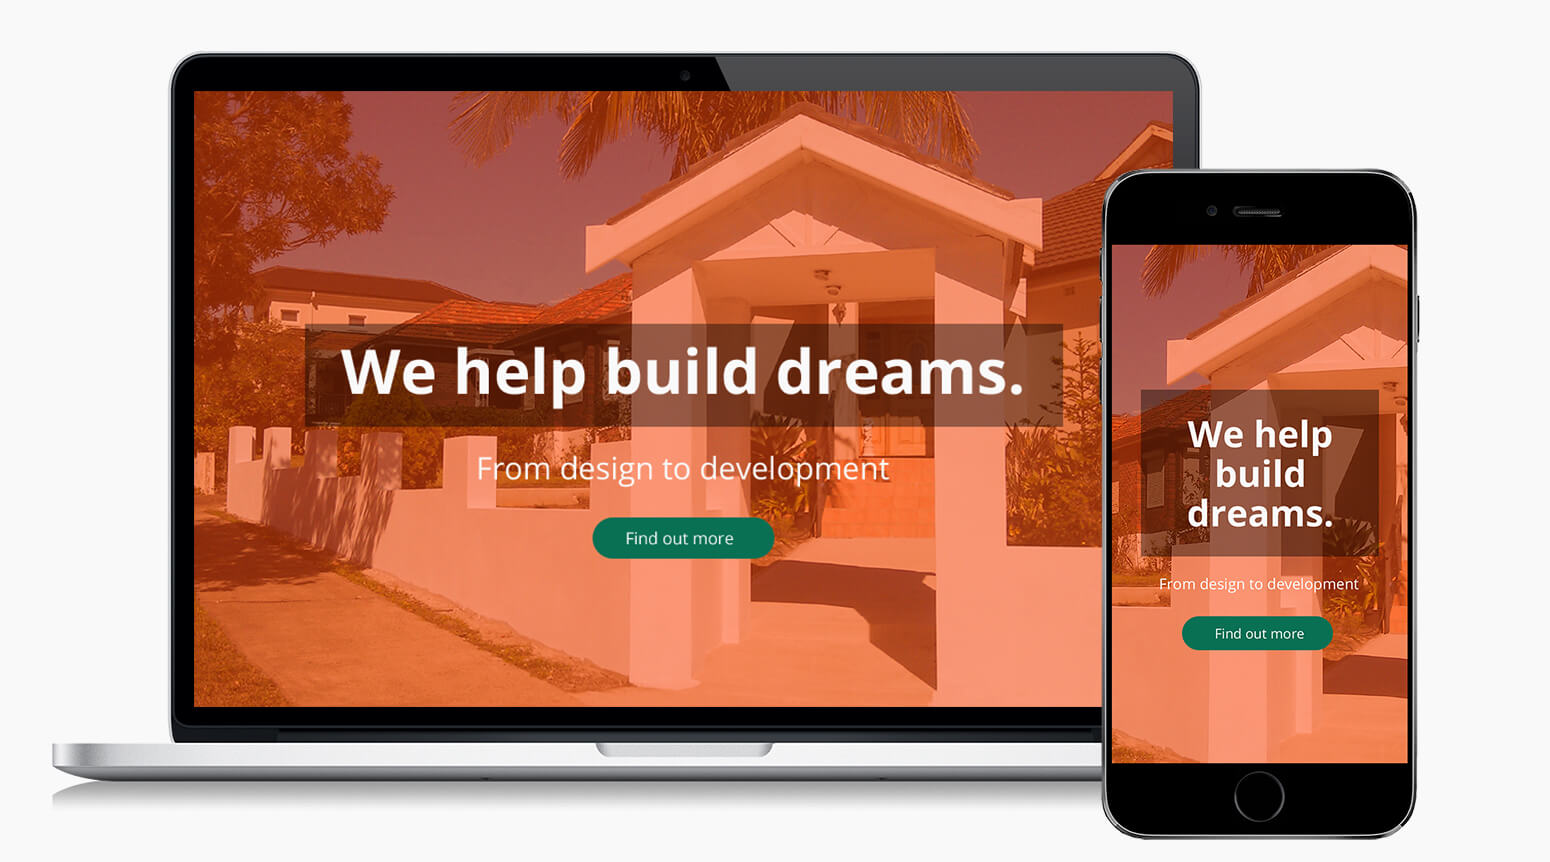 A to Z Builder's designed website on computer and mobile screens to show responsiveness